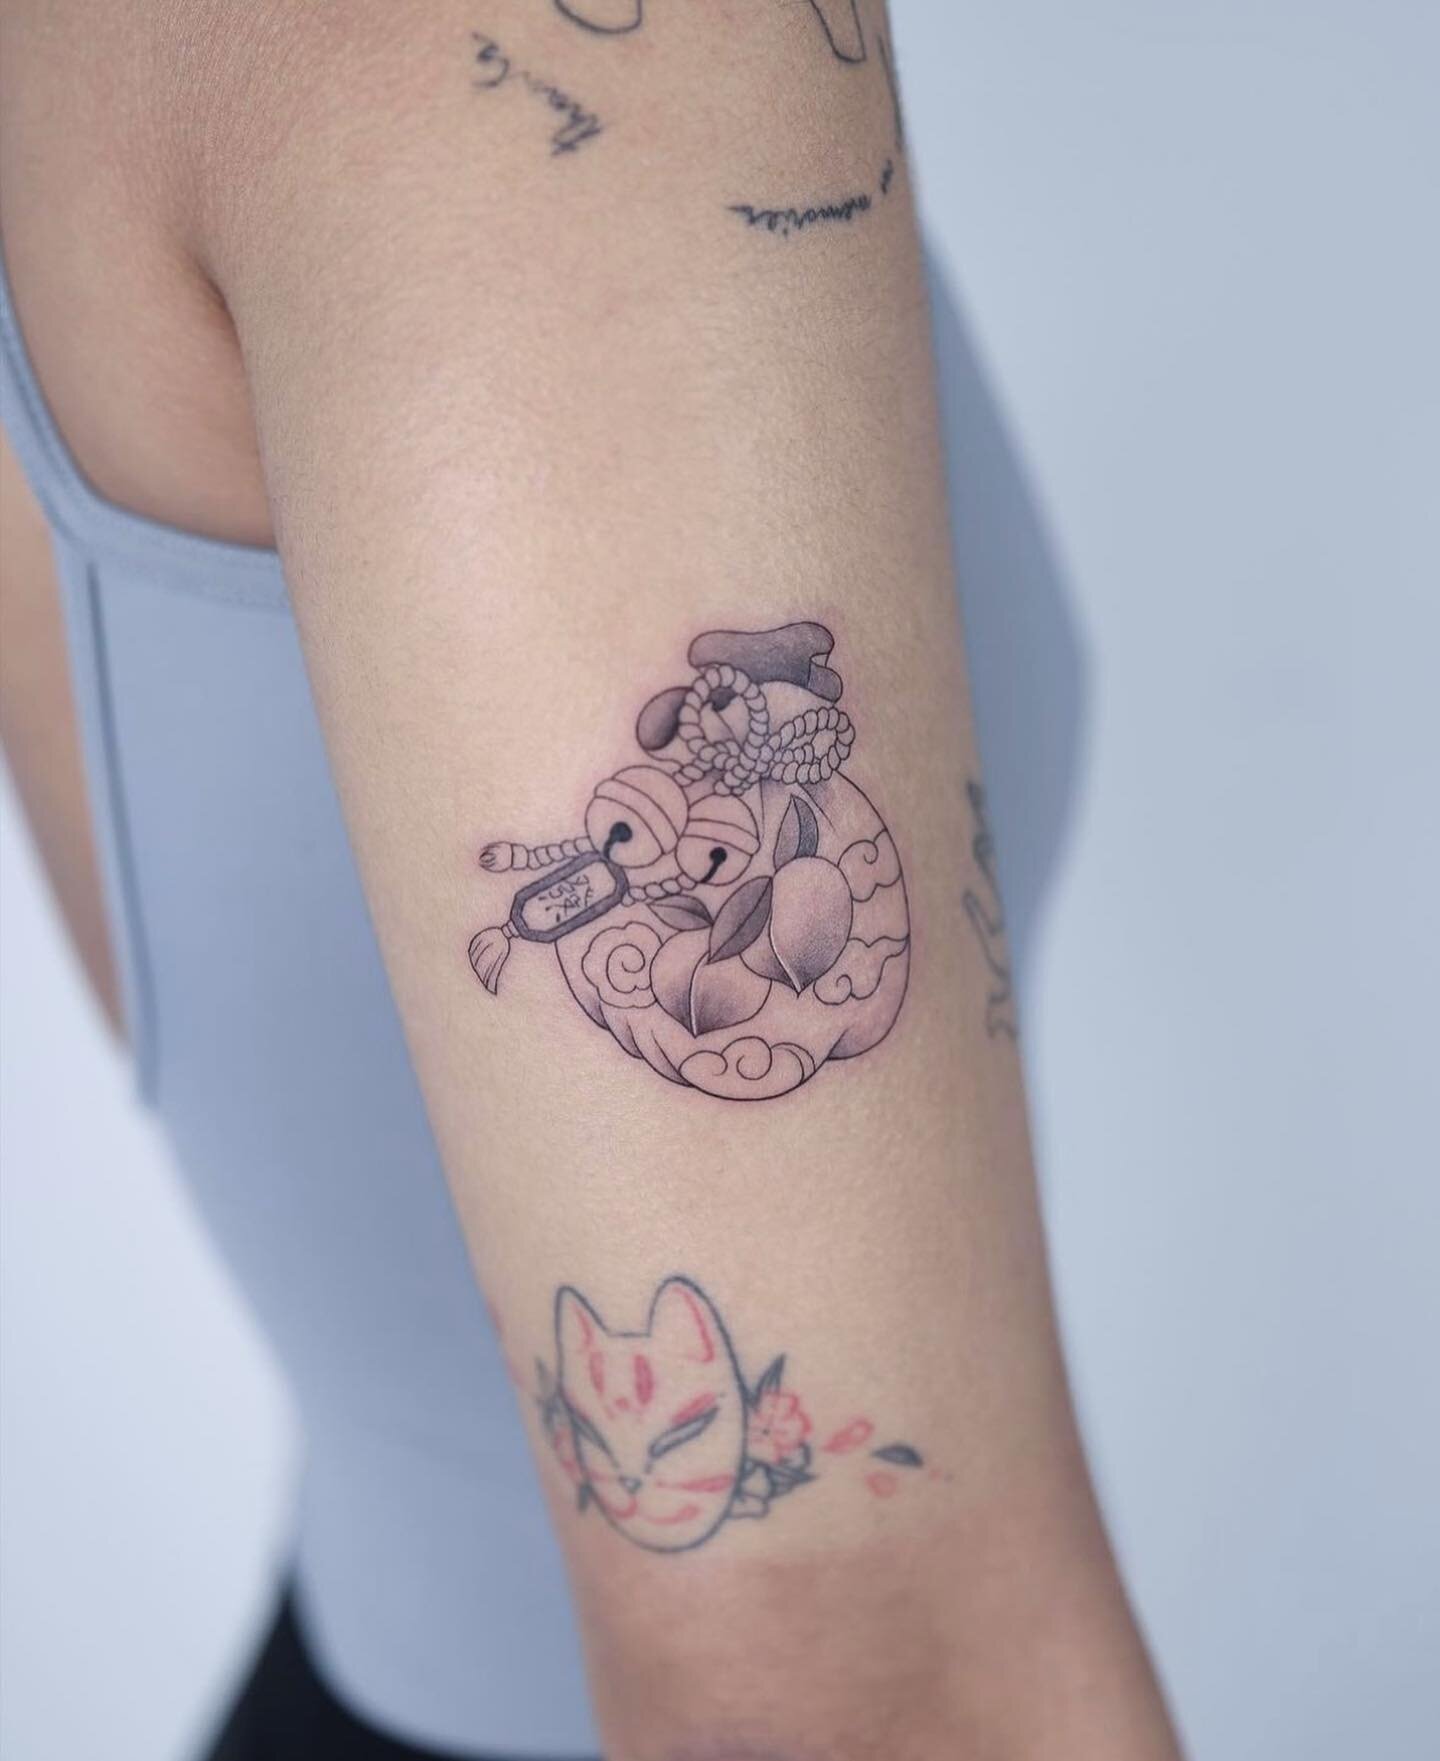 Peach charm 🍑 by @yang.tattooist 
.
Yang&rsquo;s books are open! Contact her directly with your ideas

#inkandwatertattoo #inkandwaternyc #nyctattoo #nycartist #fineline #finelinetattoo #tttism #illustrativetattoo #cutetattoo